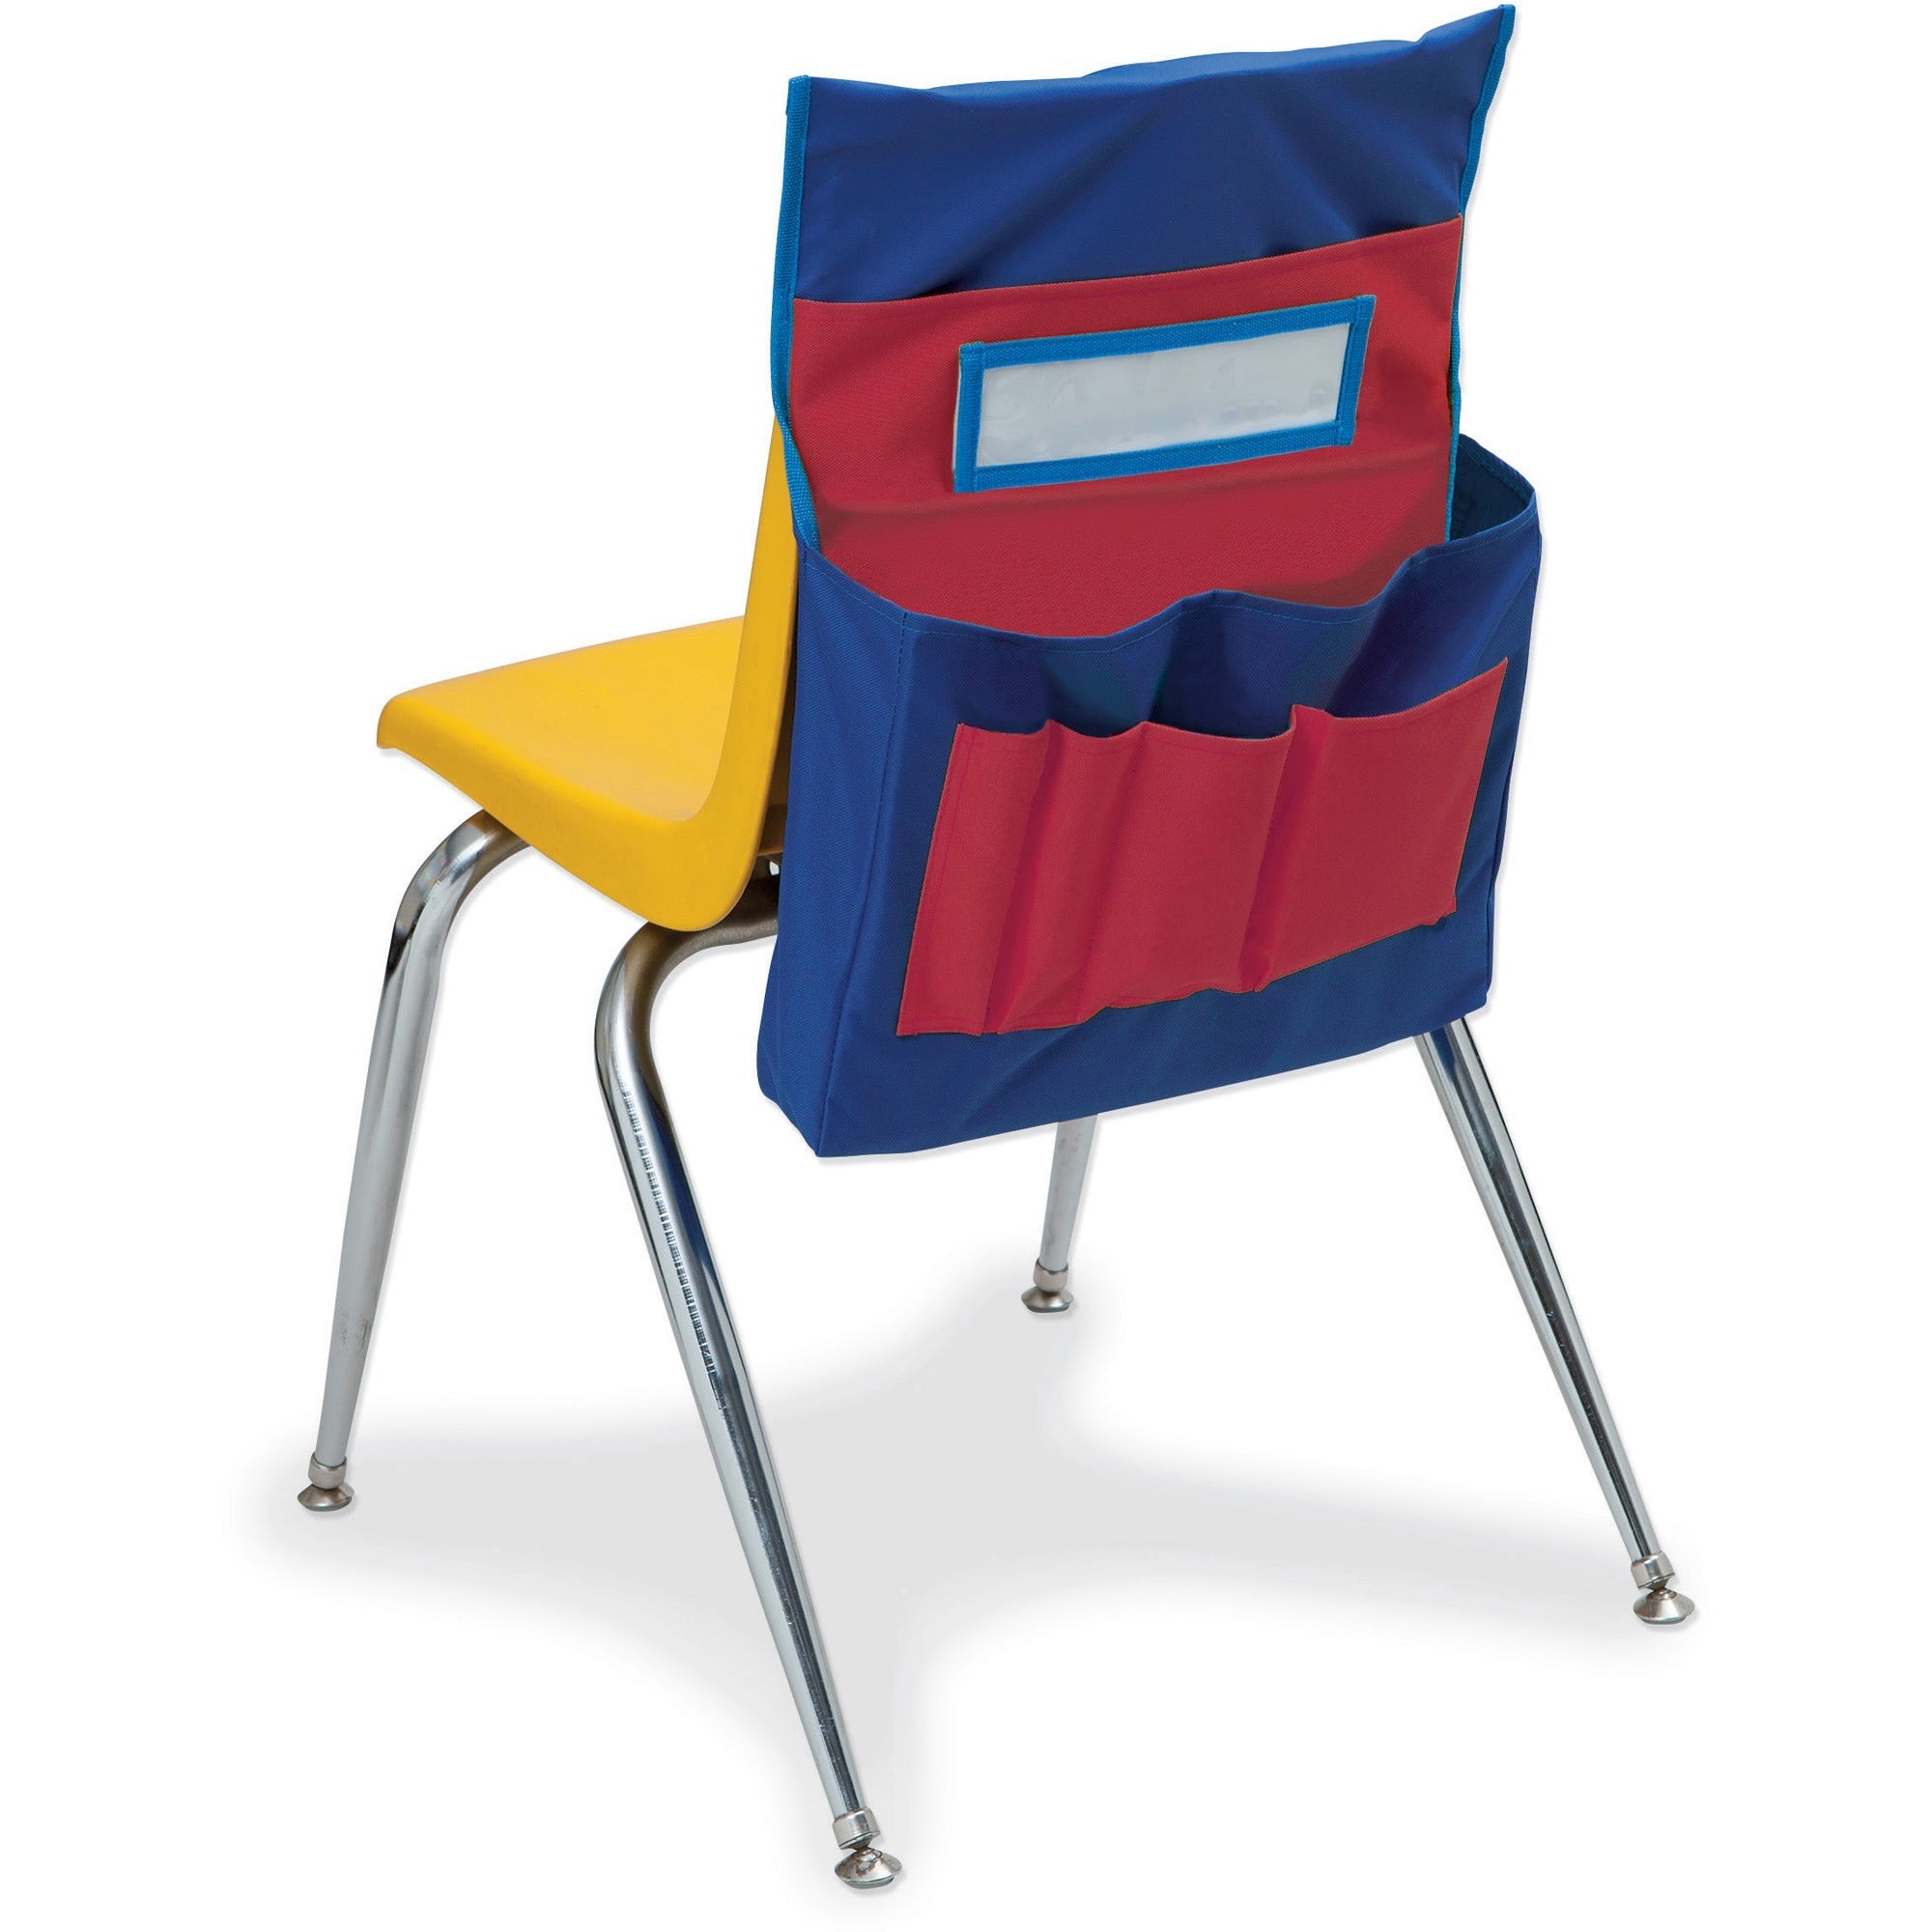 Pacon Chair Storage Pocket Chart - 6 Pocket(s) - 2 Large Pockets - 4 Small Pockets - 18.5" Height x 14.5" Width x 2.5" Depth - No - Blue, Red - Polyester - 1Each - 